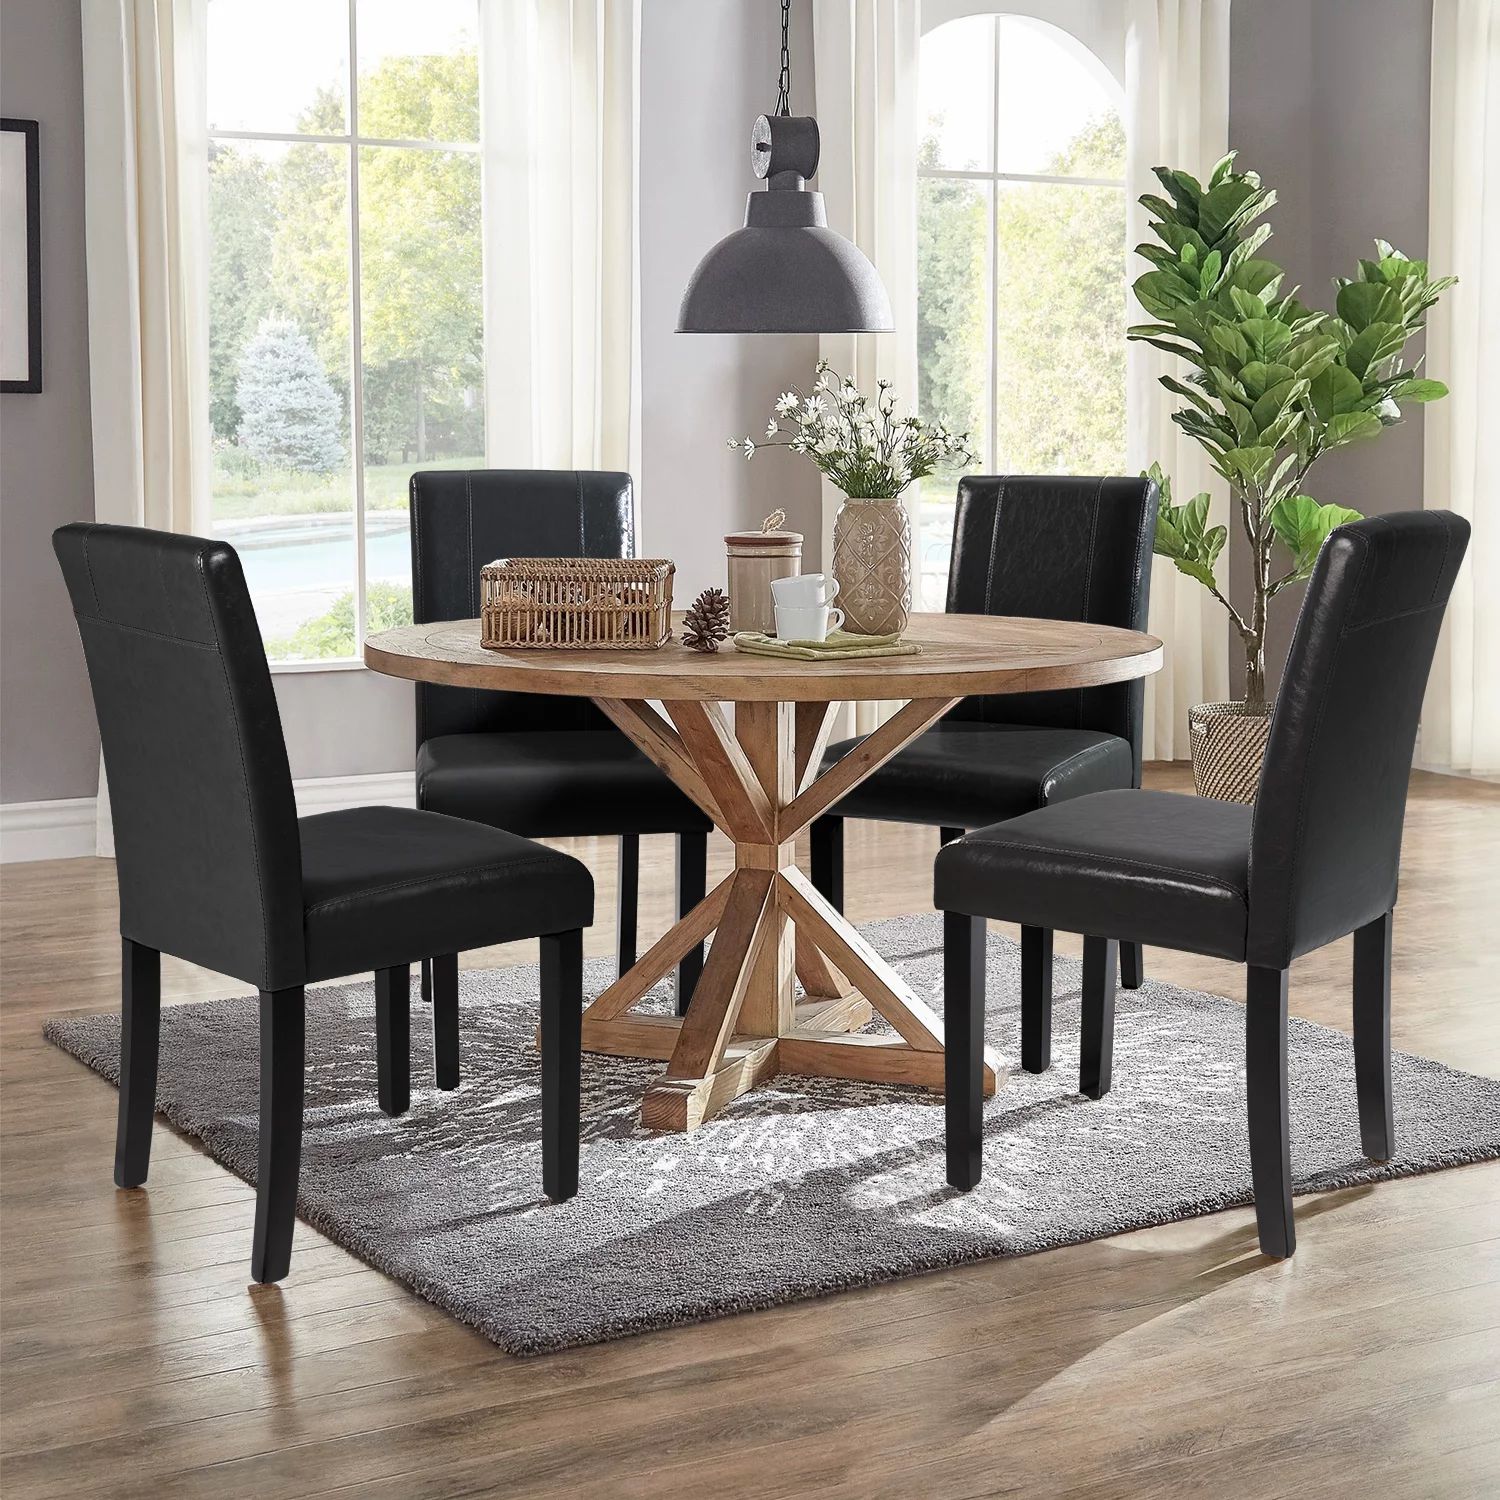 Lacoo Set of 4 Urban Style PU Leather Dining Chairs with Wood Legs, Black | Walmart (US)